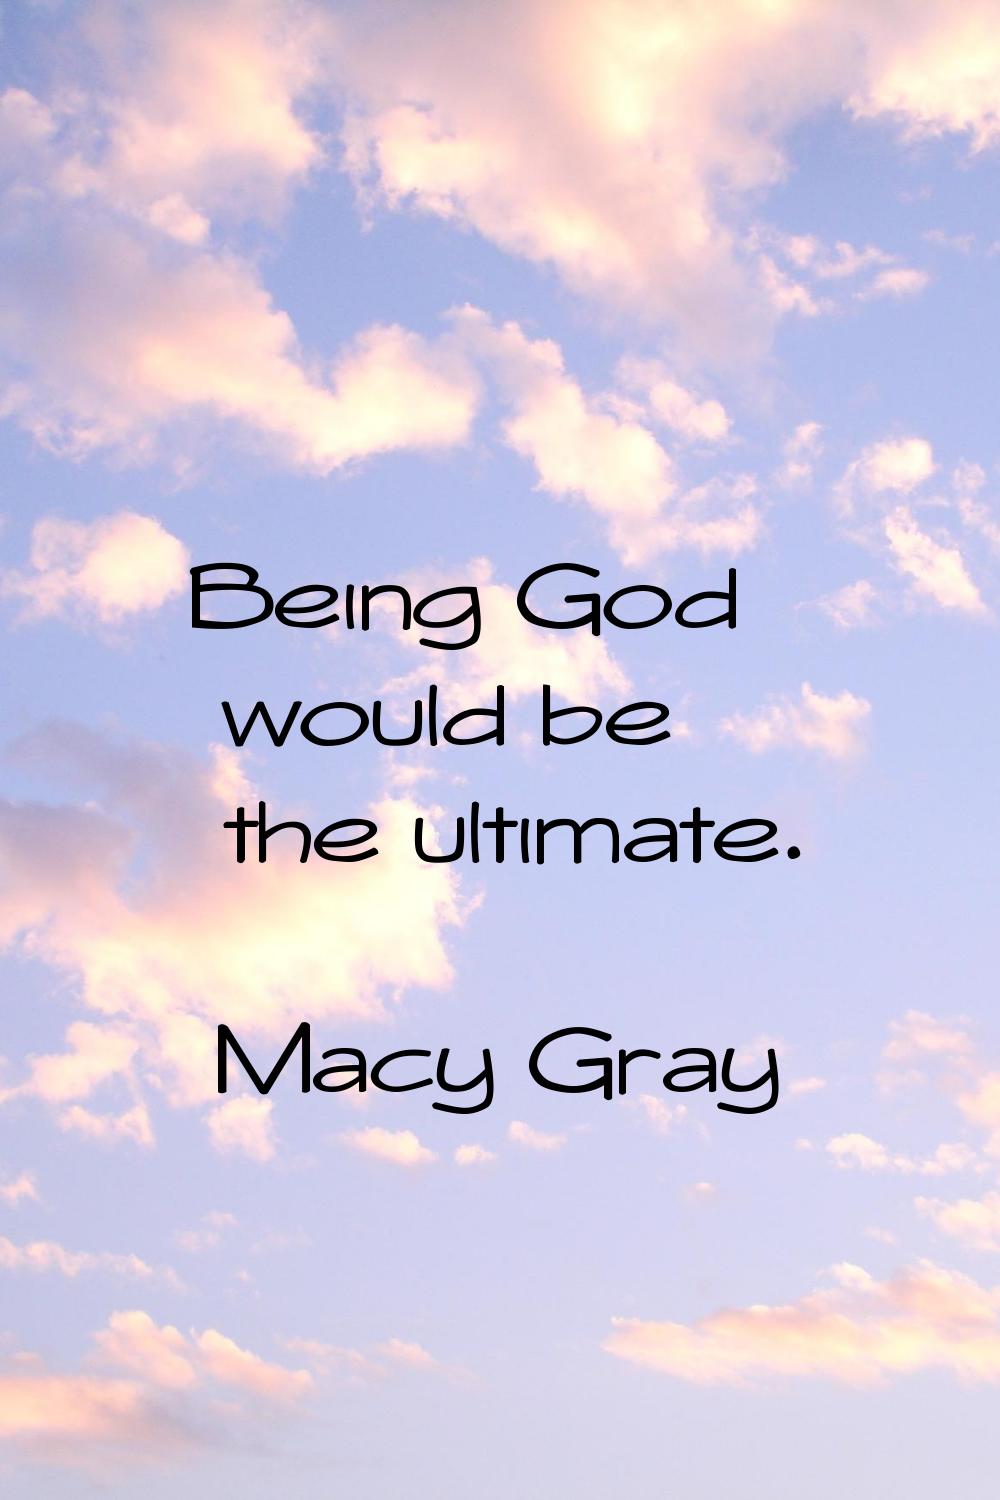 Being God would be the ultimate.